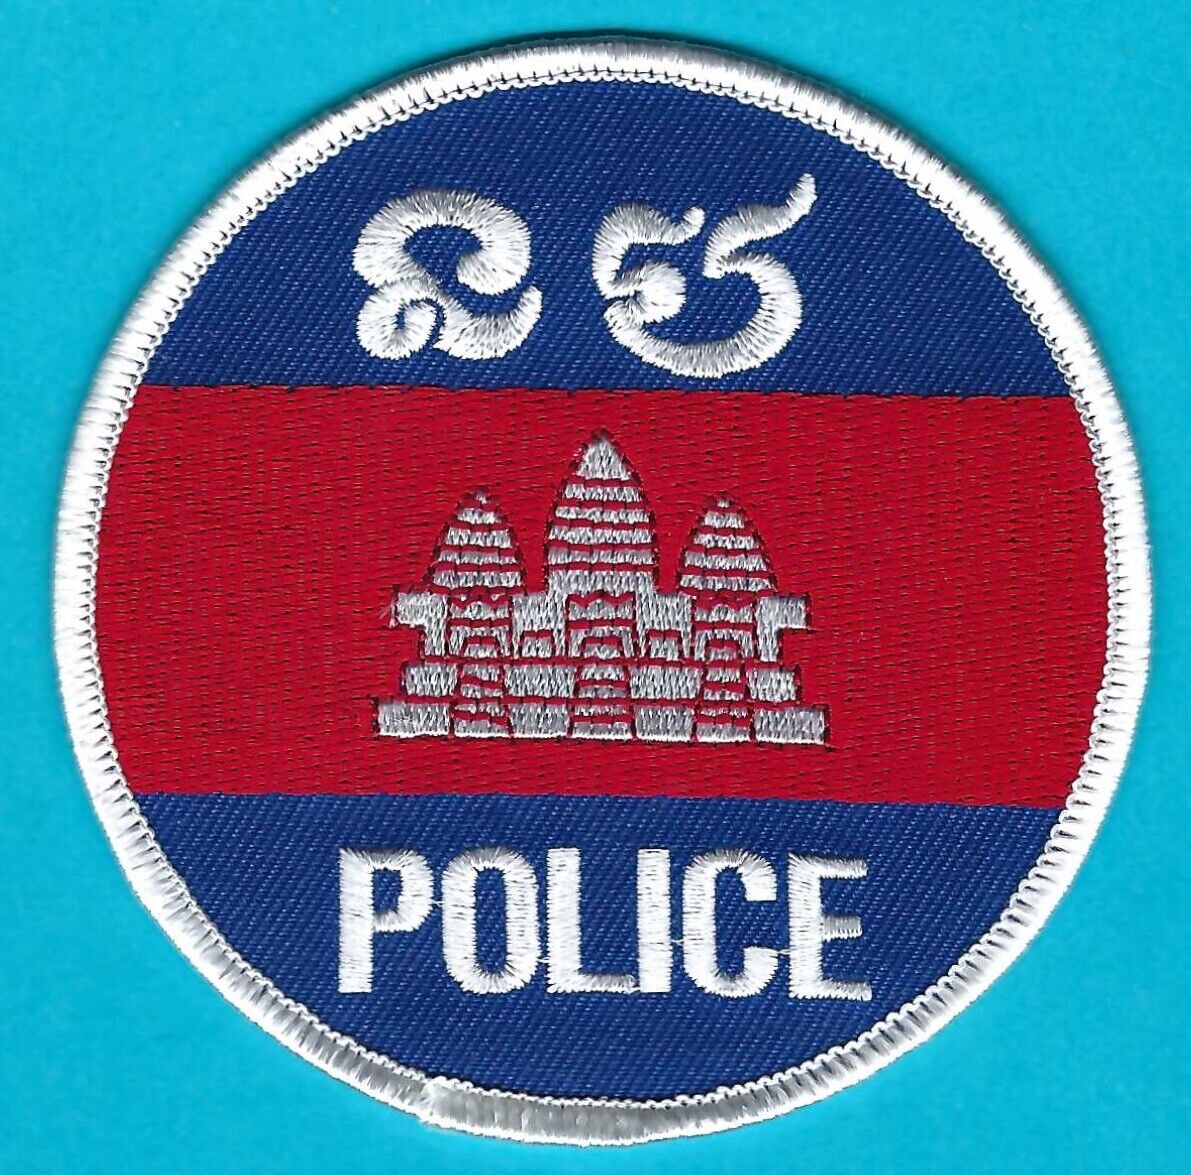 CAMBODIA NATIONAL POLICE SHOULDER PATCH